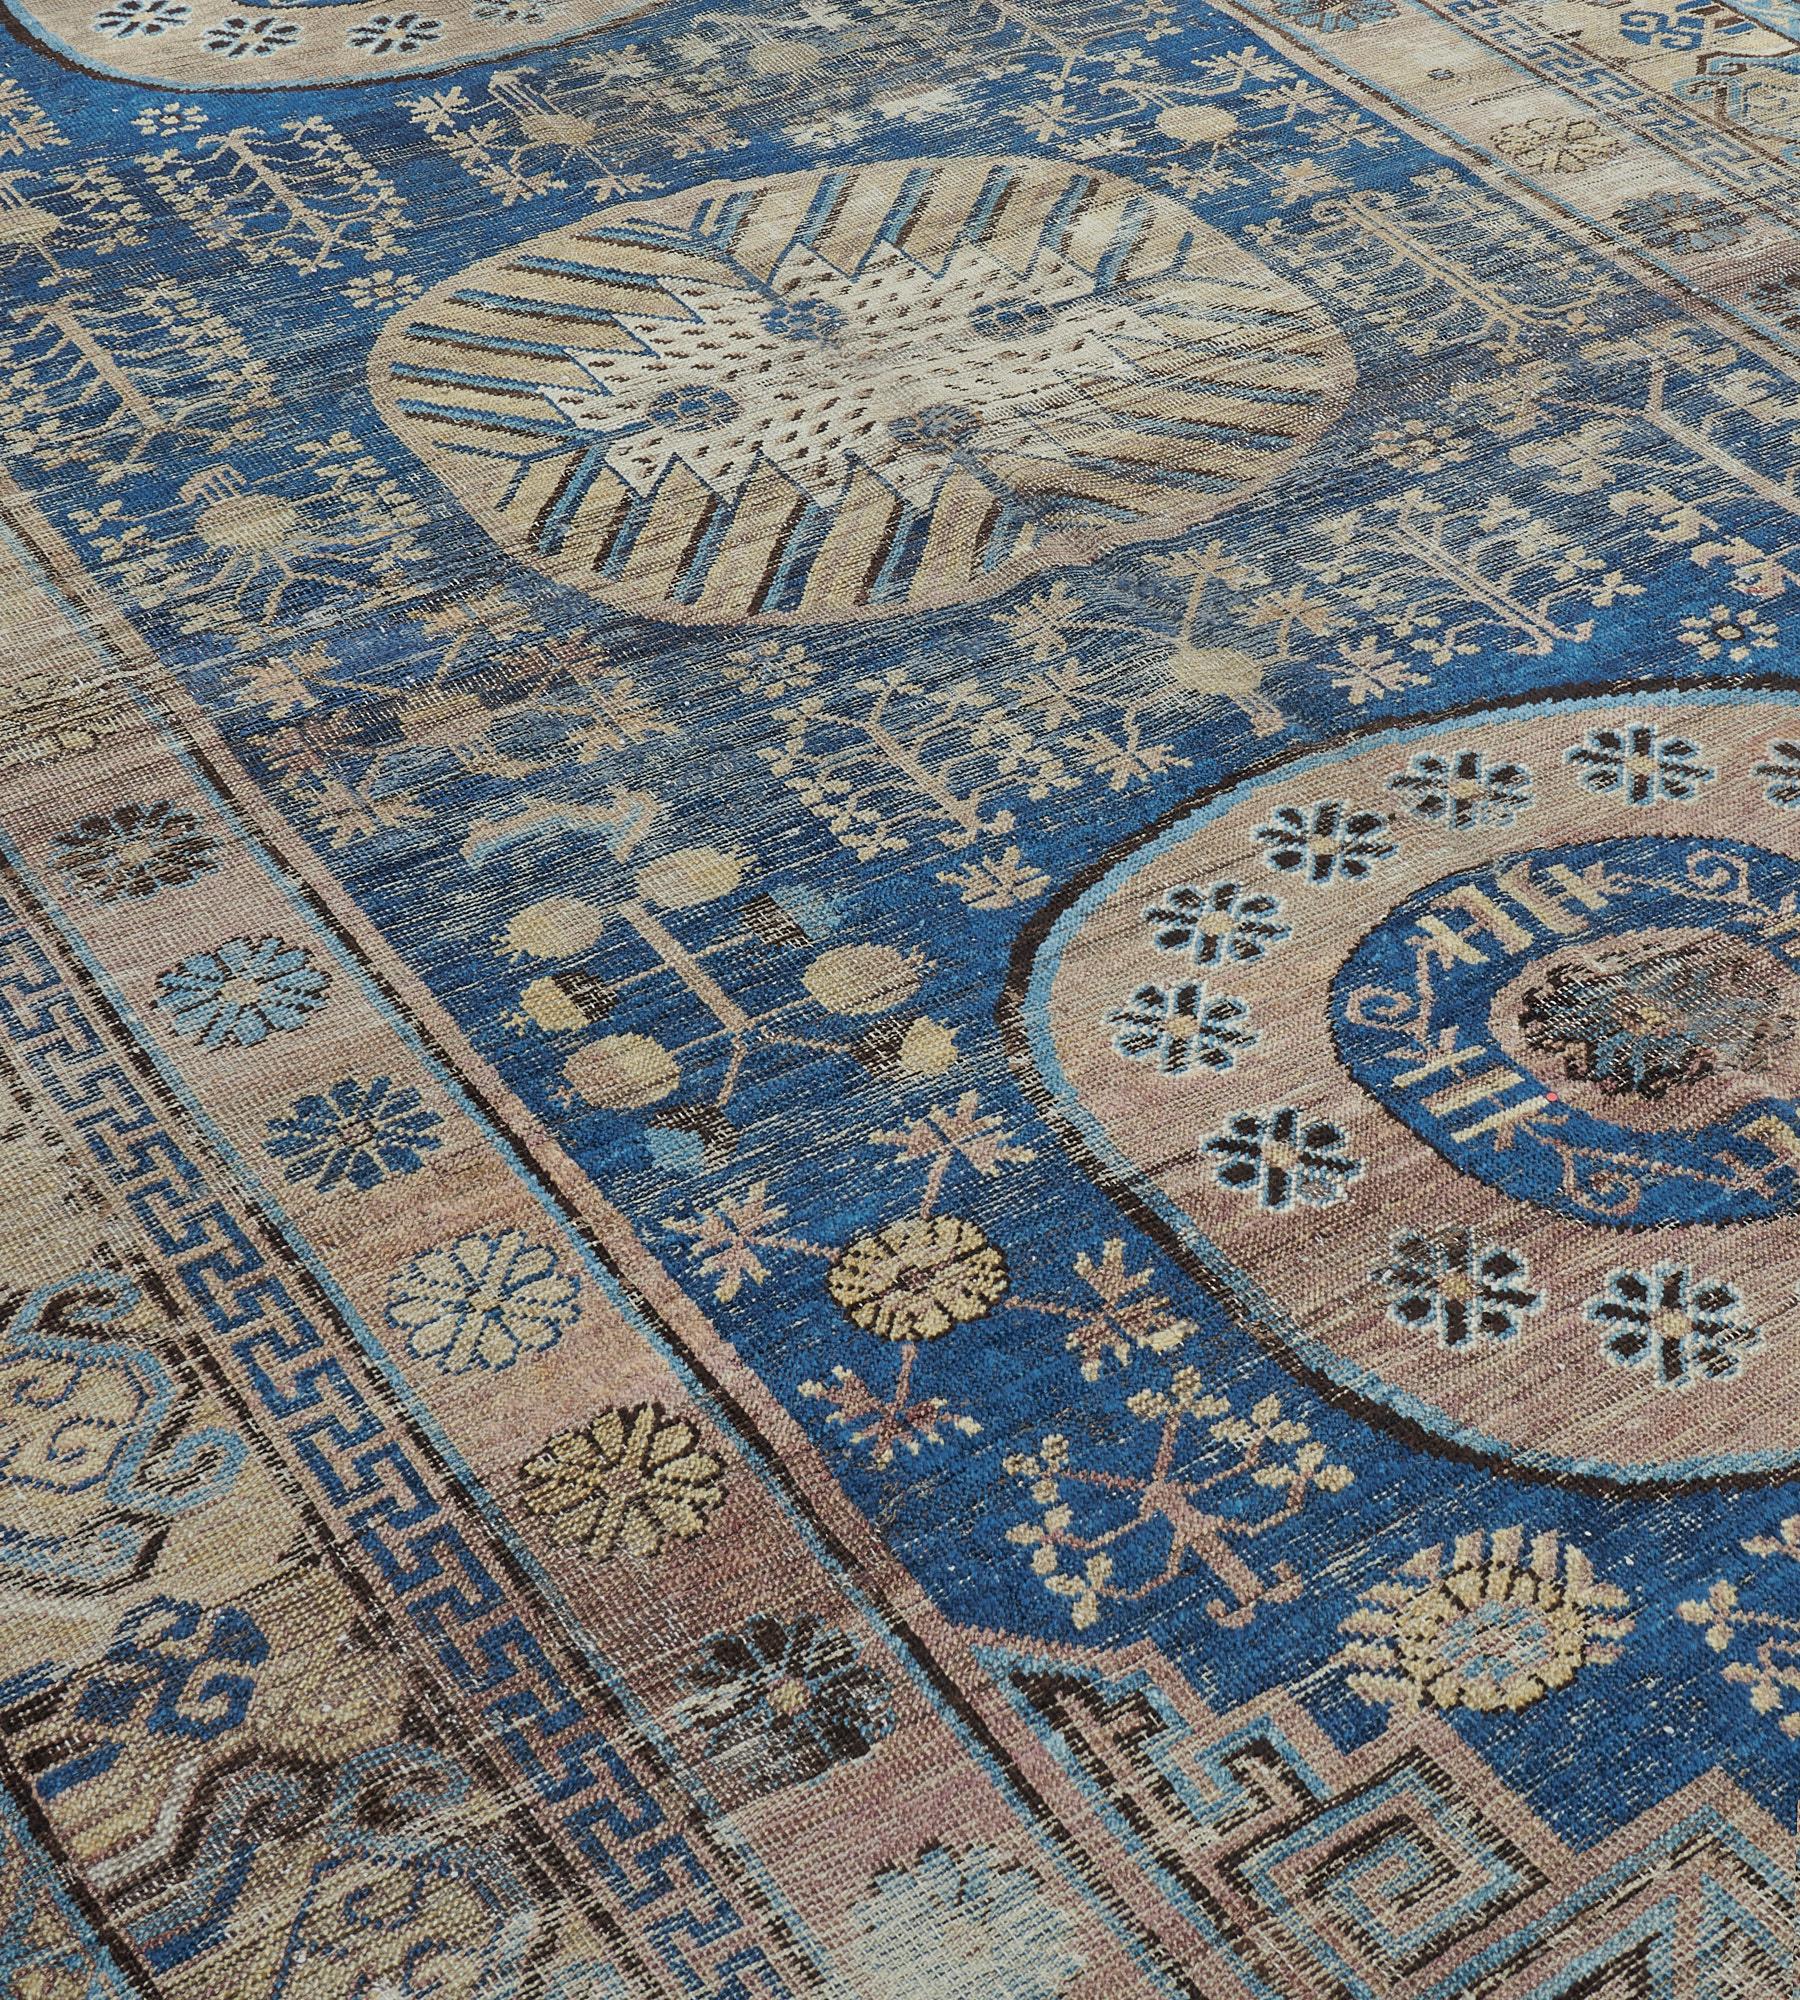 This antique Khotan rug has a shaded royal-blue field scattered with flowering stems, flowerheads and leafy trees around a column of three large roundels the central with a large ivory cusped lozenge issuing royal-blue angular tendrils, the roundels